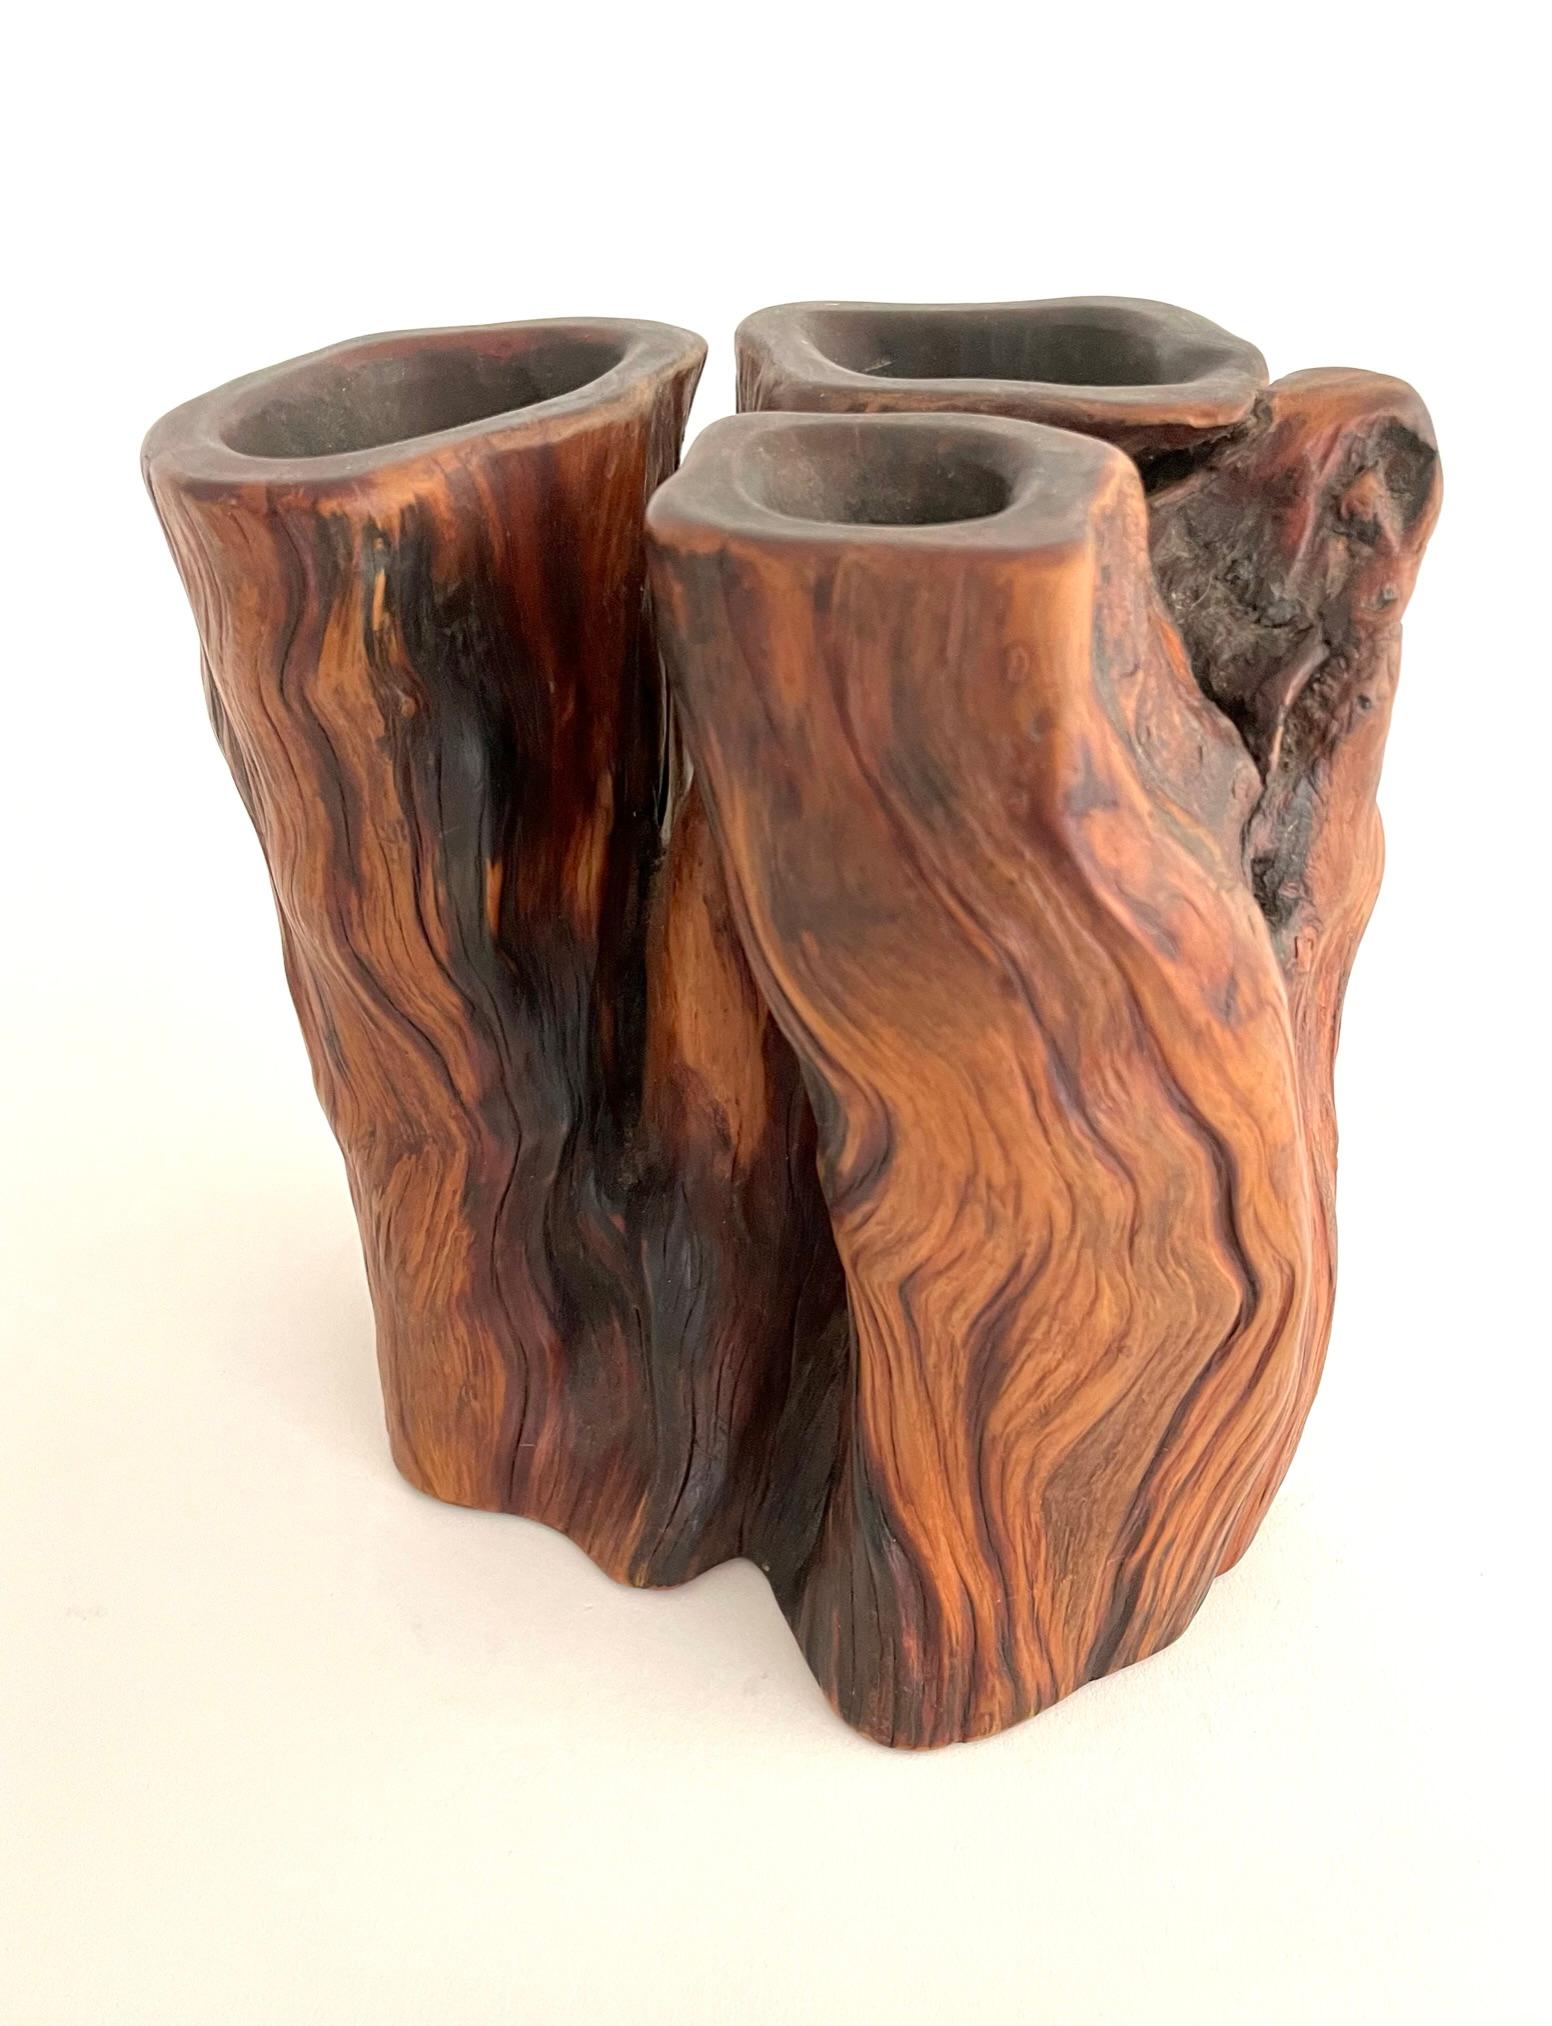 Beautiful organic shaped Cypress root brush pot. This cypress root was carved out to hold the scholar’s calligraphy brushes. The aged natural patina enhances the beautiful wood grain of the cypress root. Natural shaped objects are very desirable in